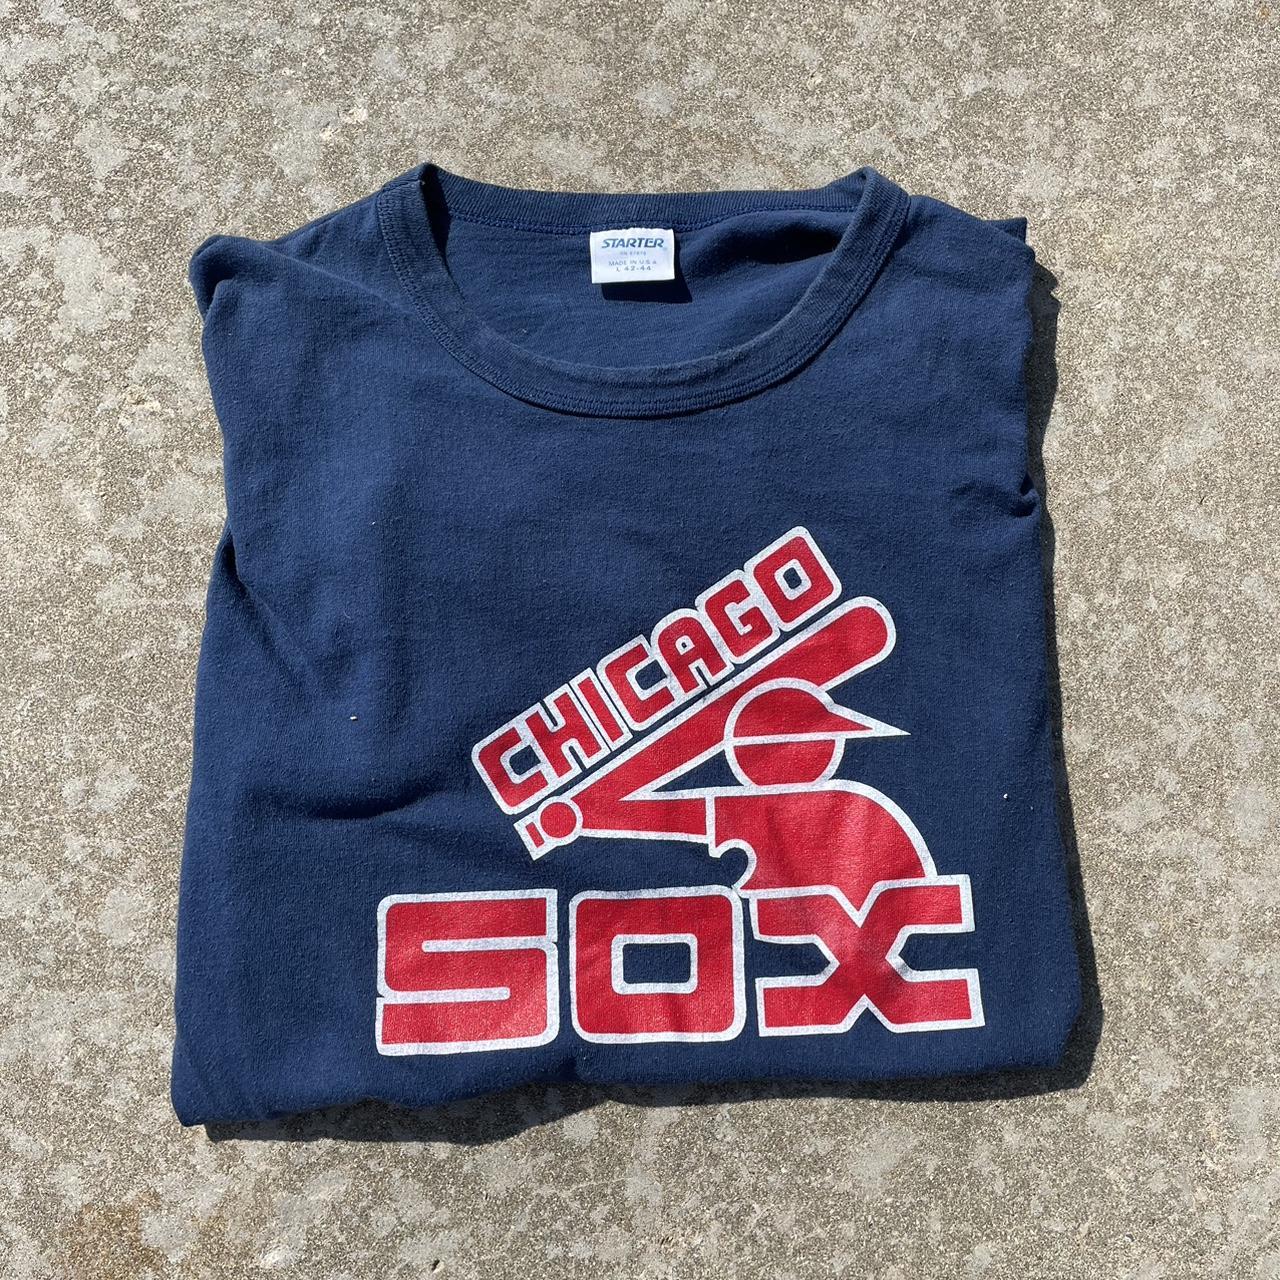 Vintage 80s Large Florida Chicago White Sox shirt, hoodie, sweater